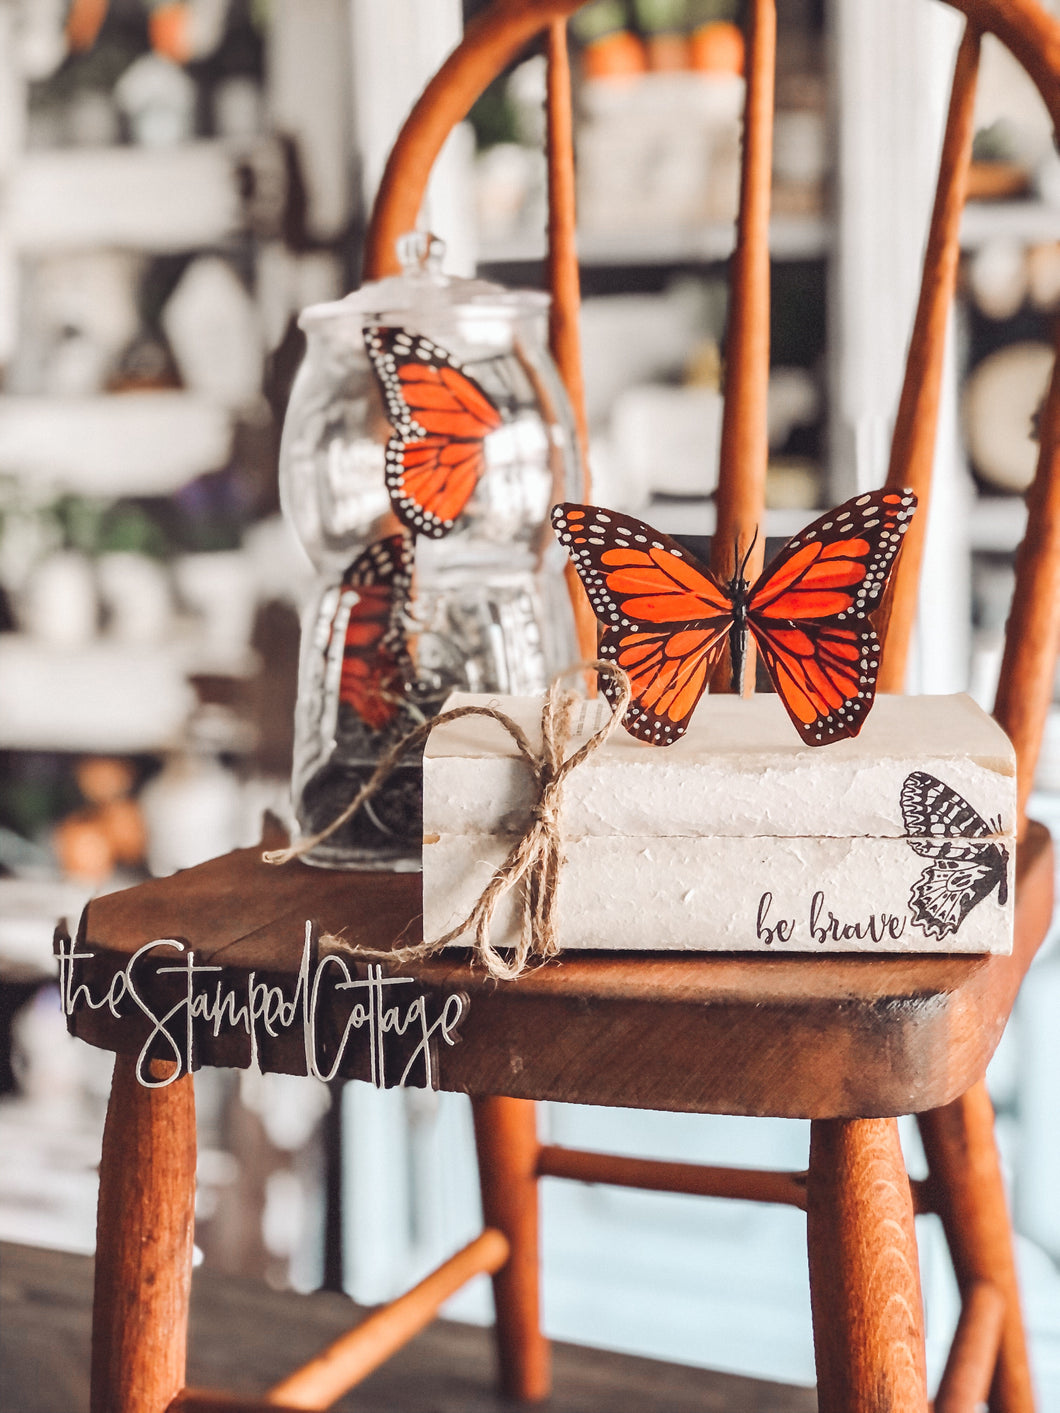 Stamped Book Stack - be brave with a butterfly wing